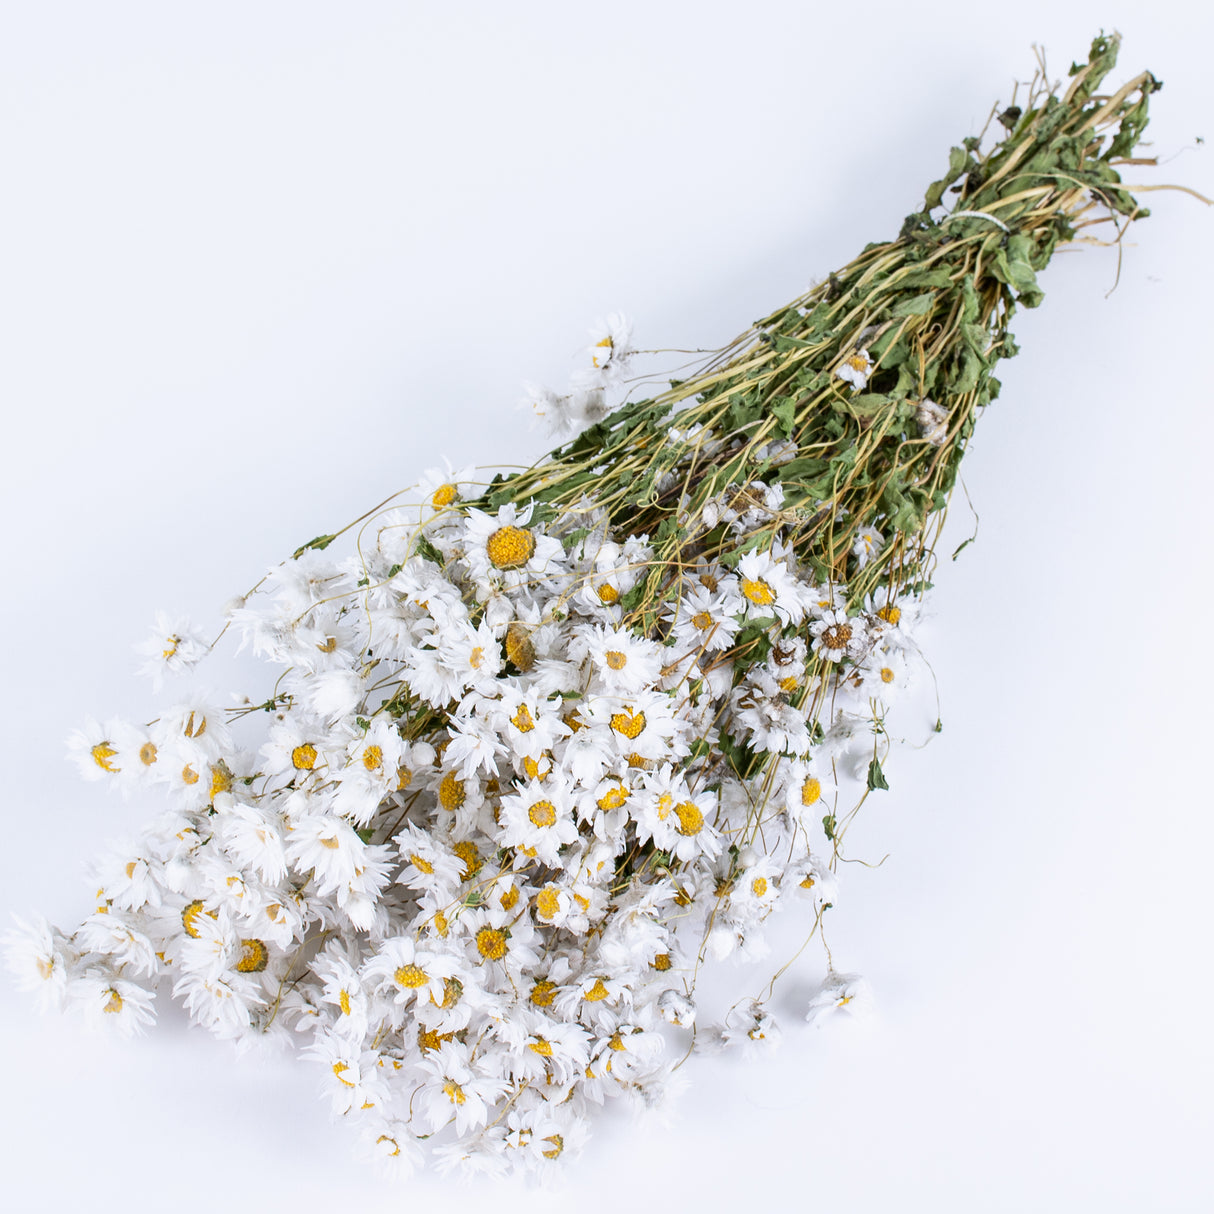 This image shows a bunch of white rodanthe flowers laid on a white background